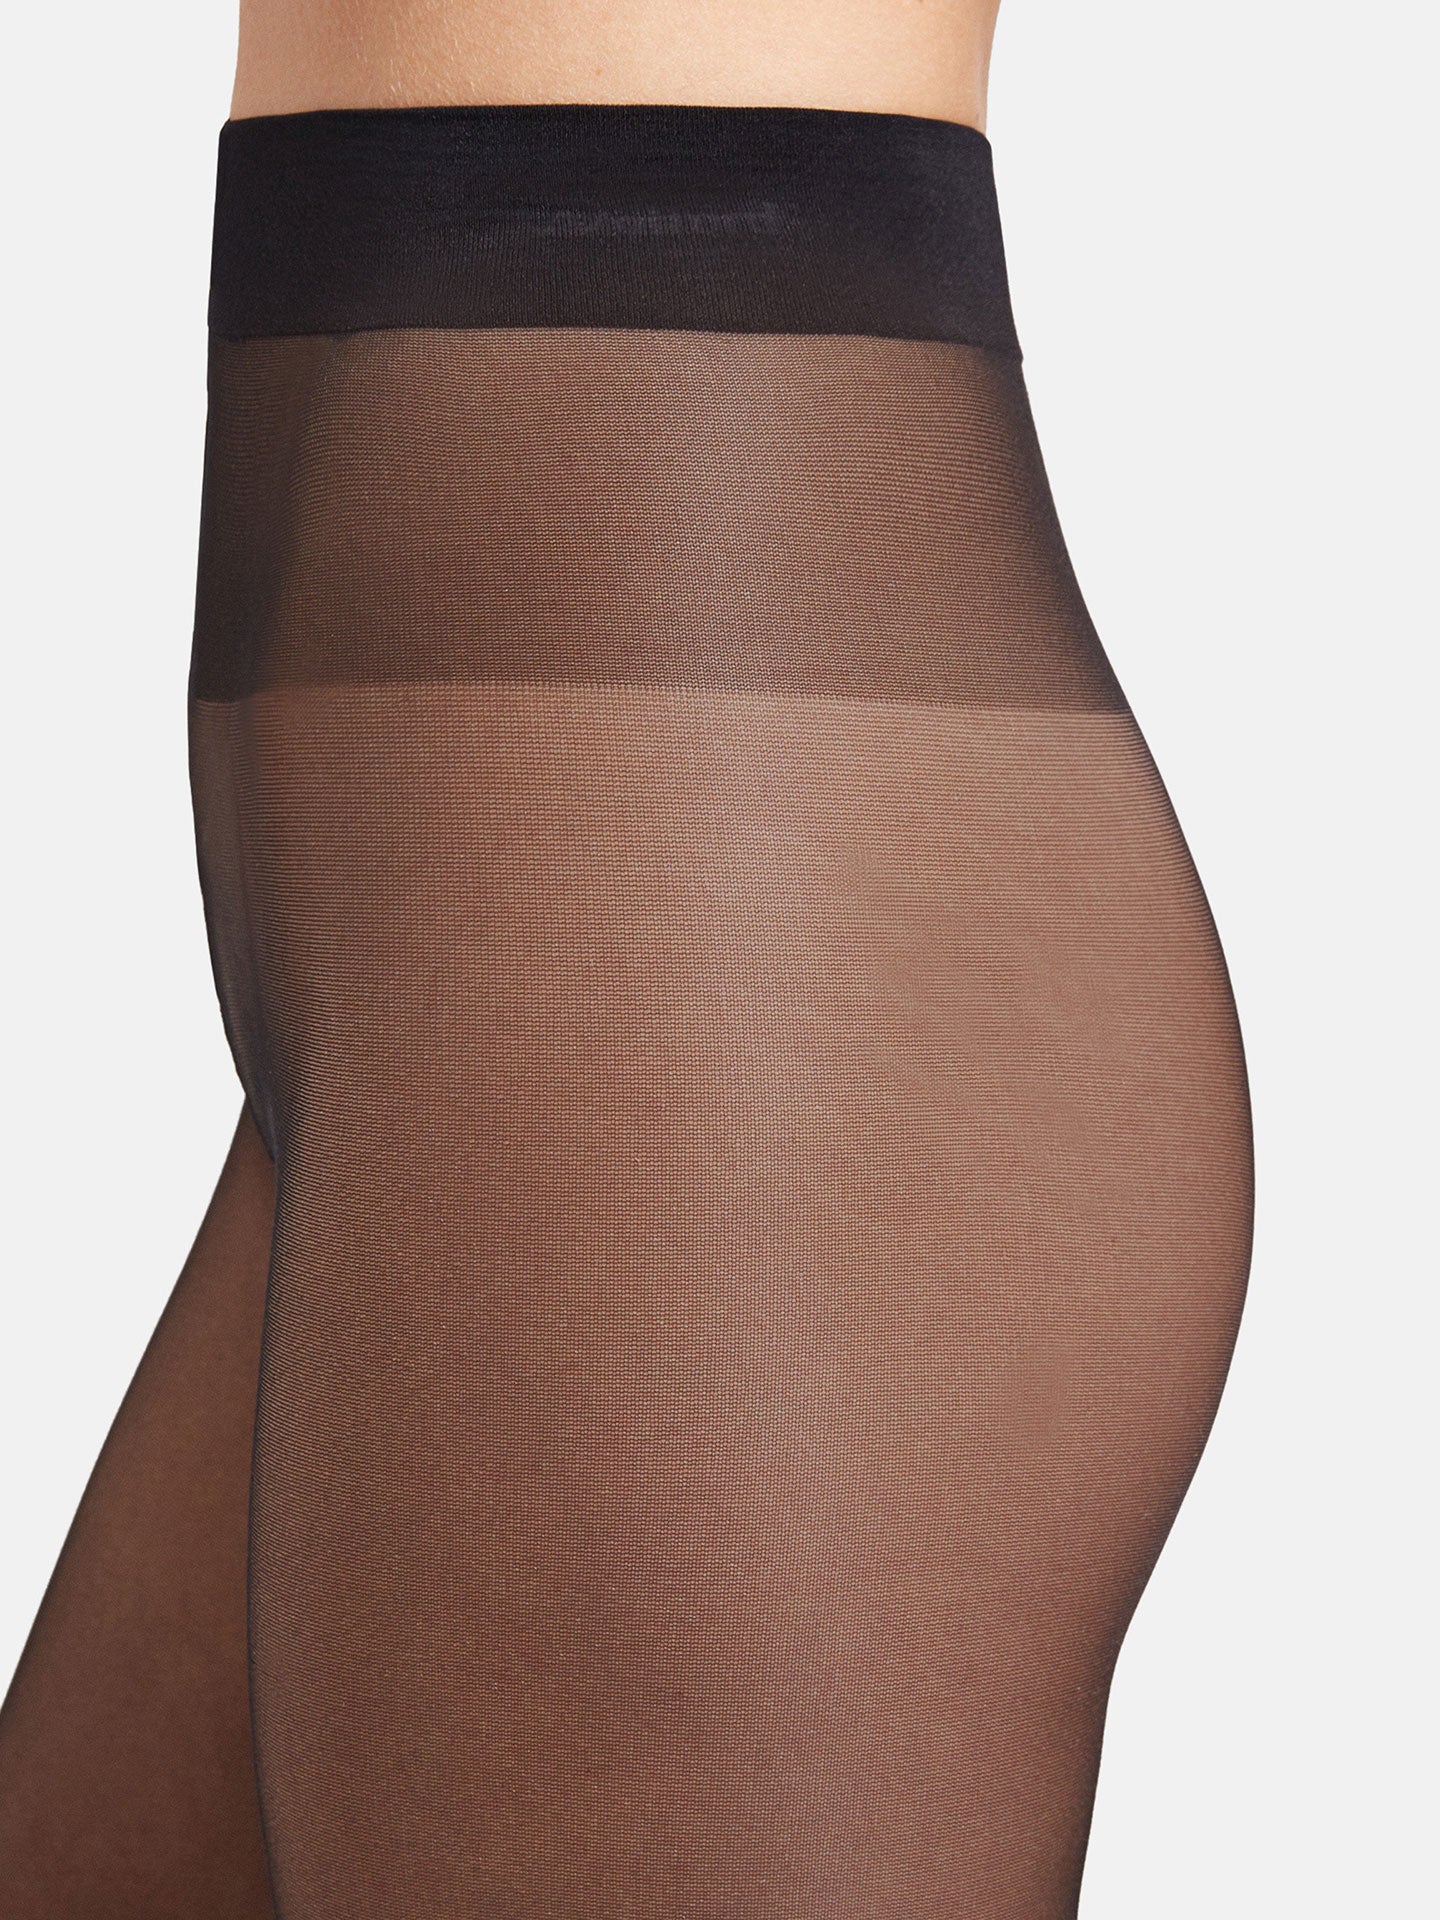 WOLFORD Satin Touch 20 in Black